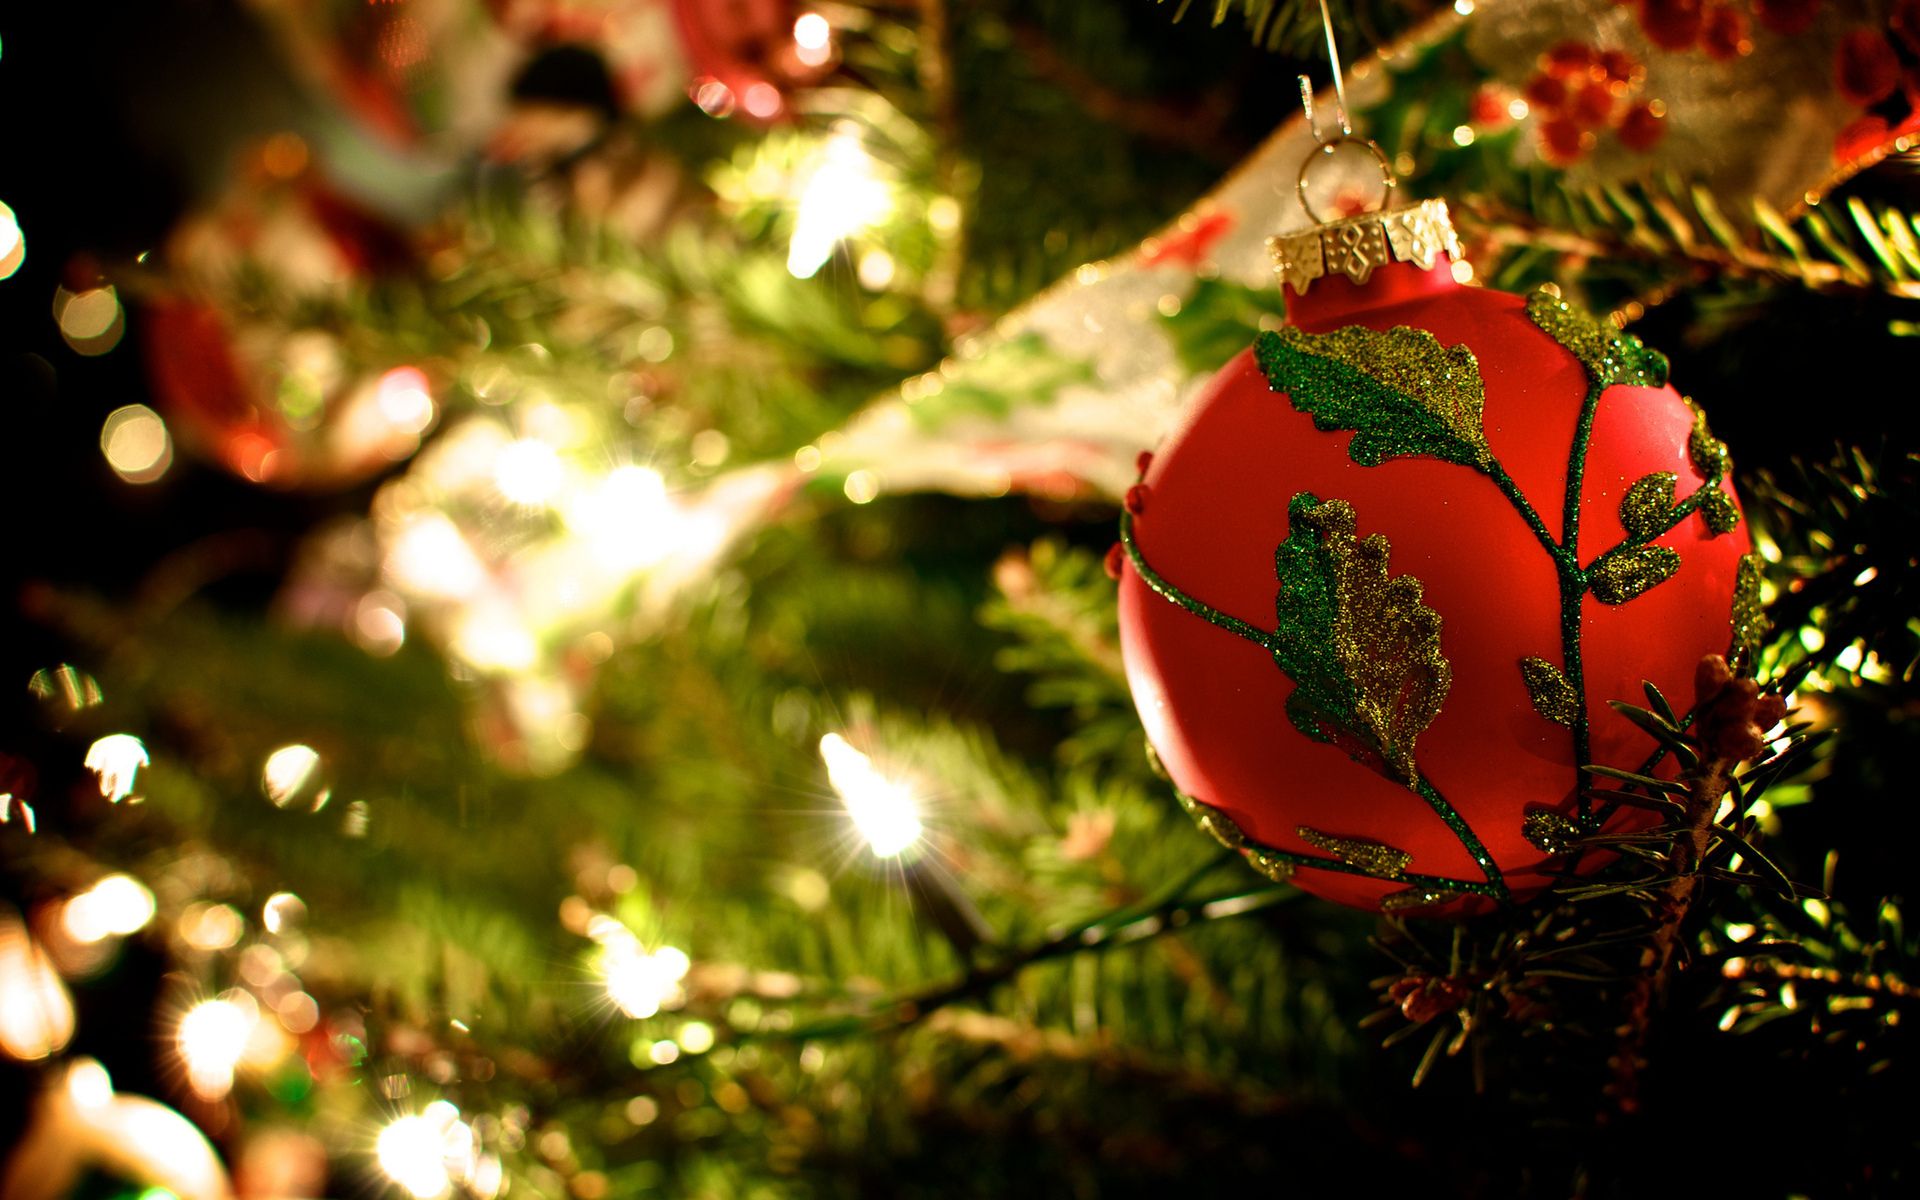 A red ornament with green leaves is hanging on a Christmas tree. - Christmas lights